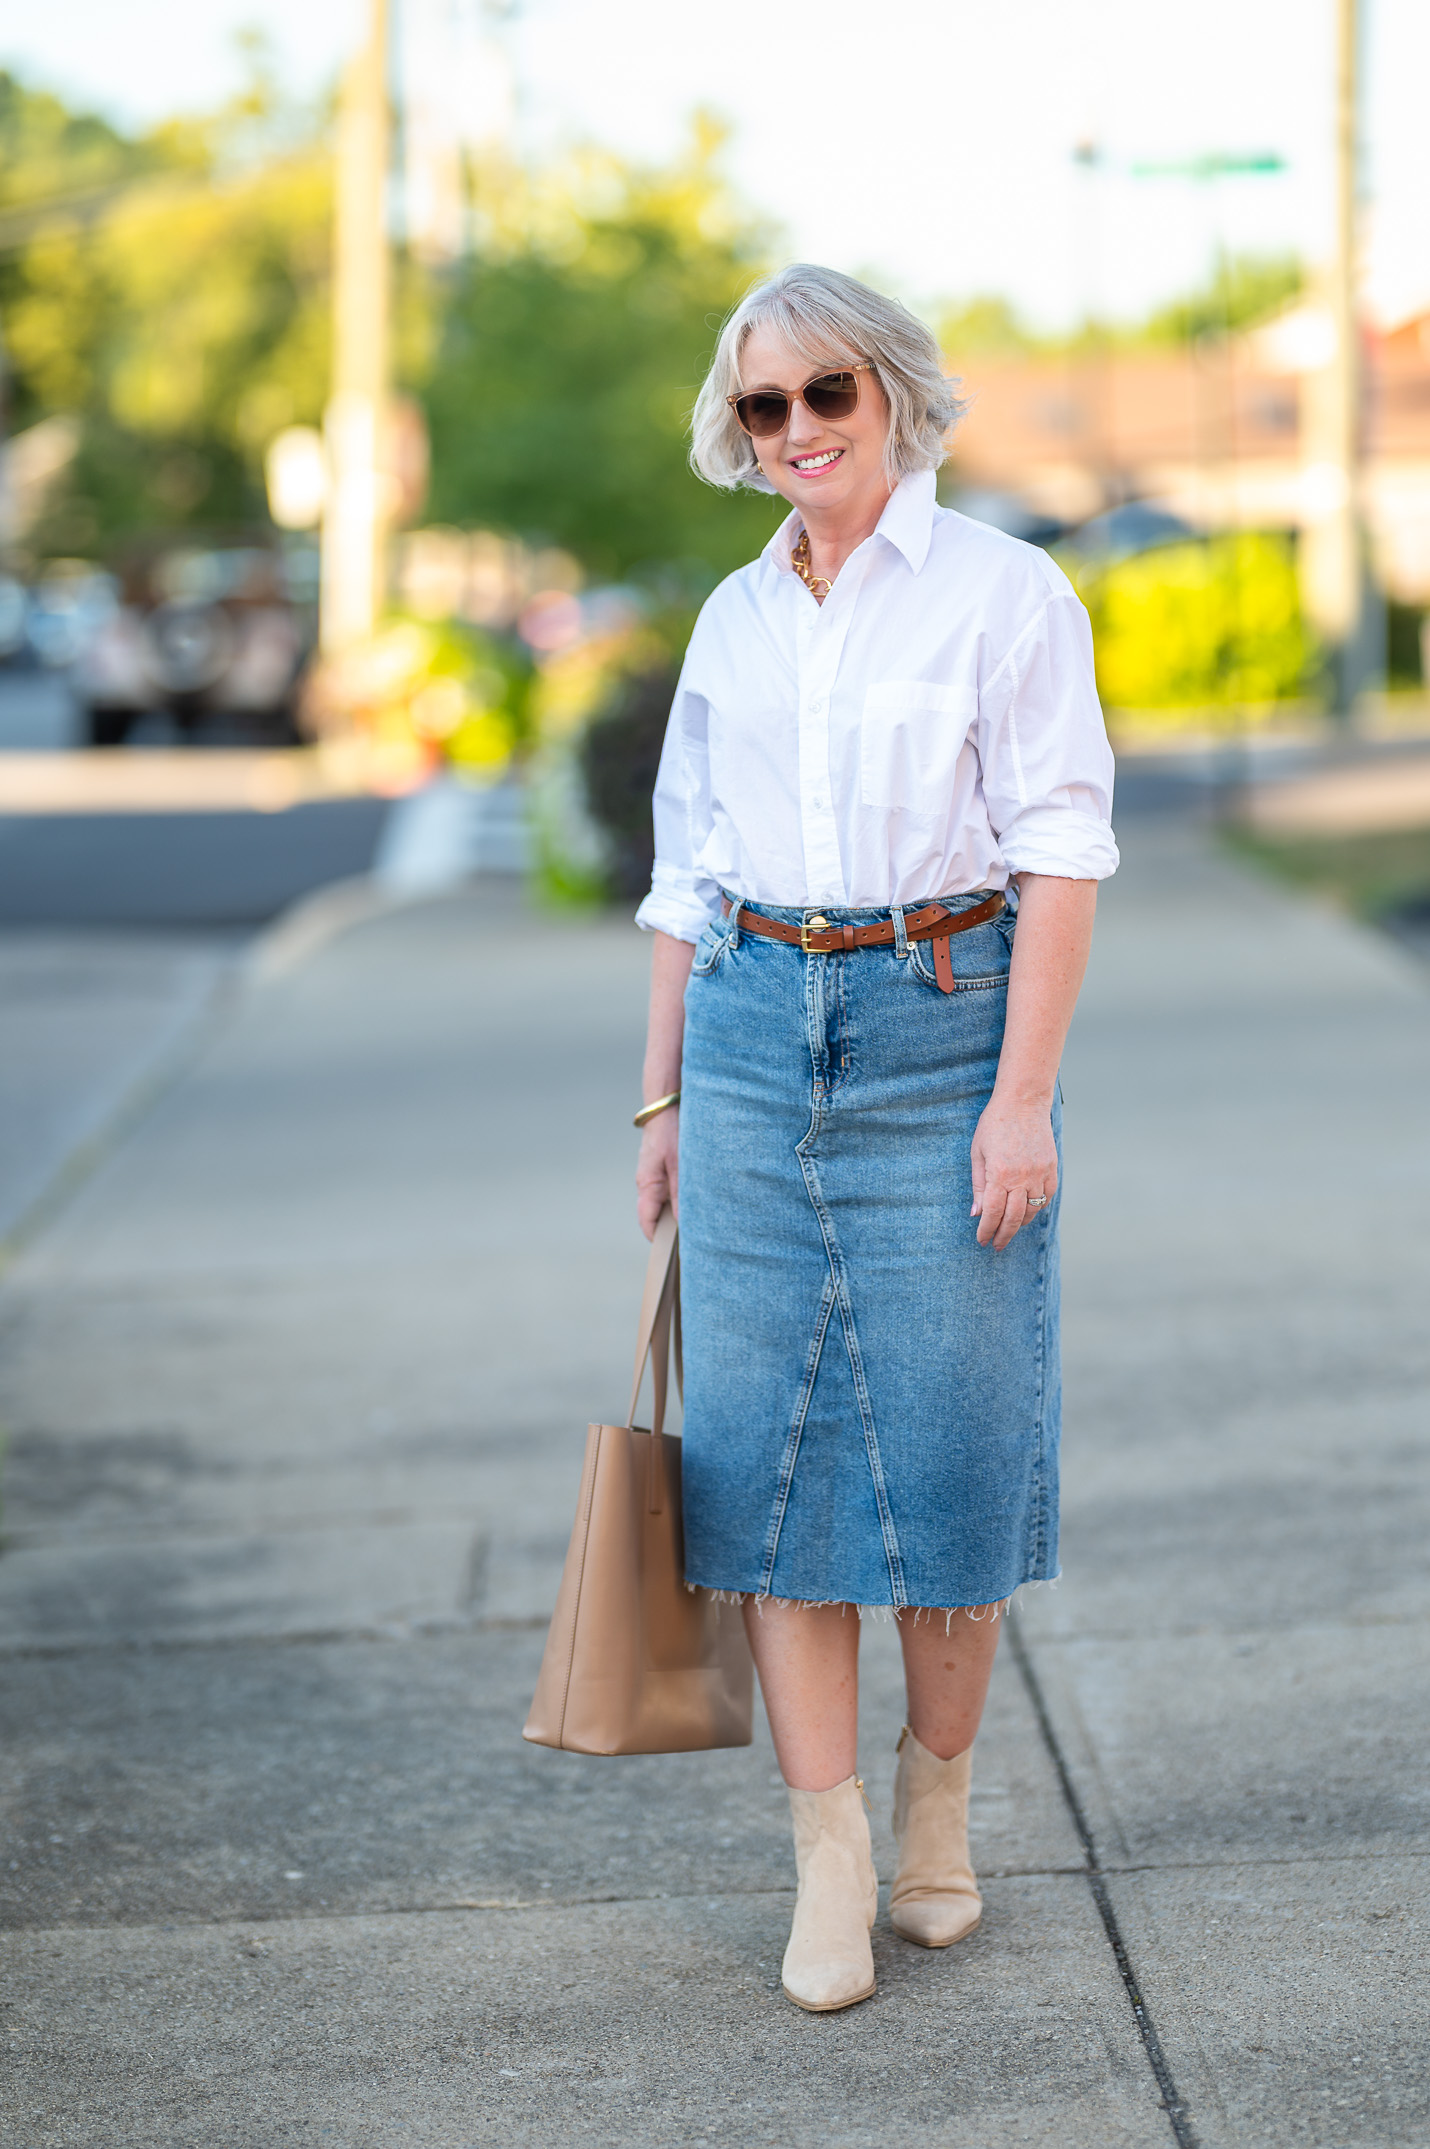 A Denim Skirt Outfit for Early Fall